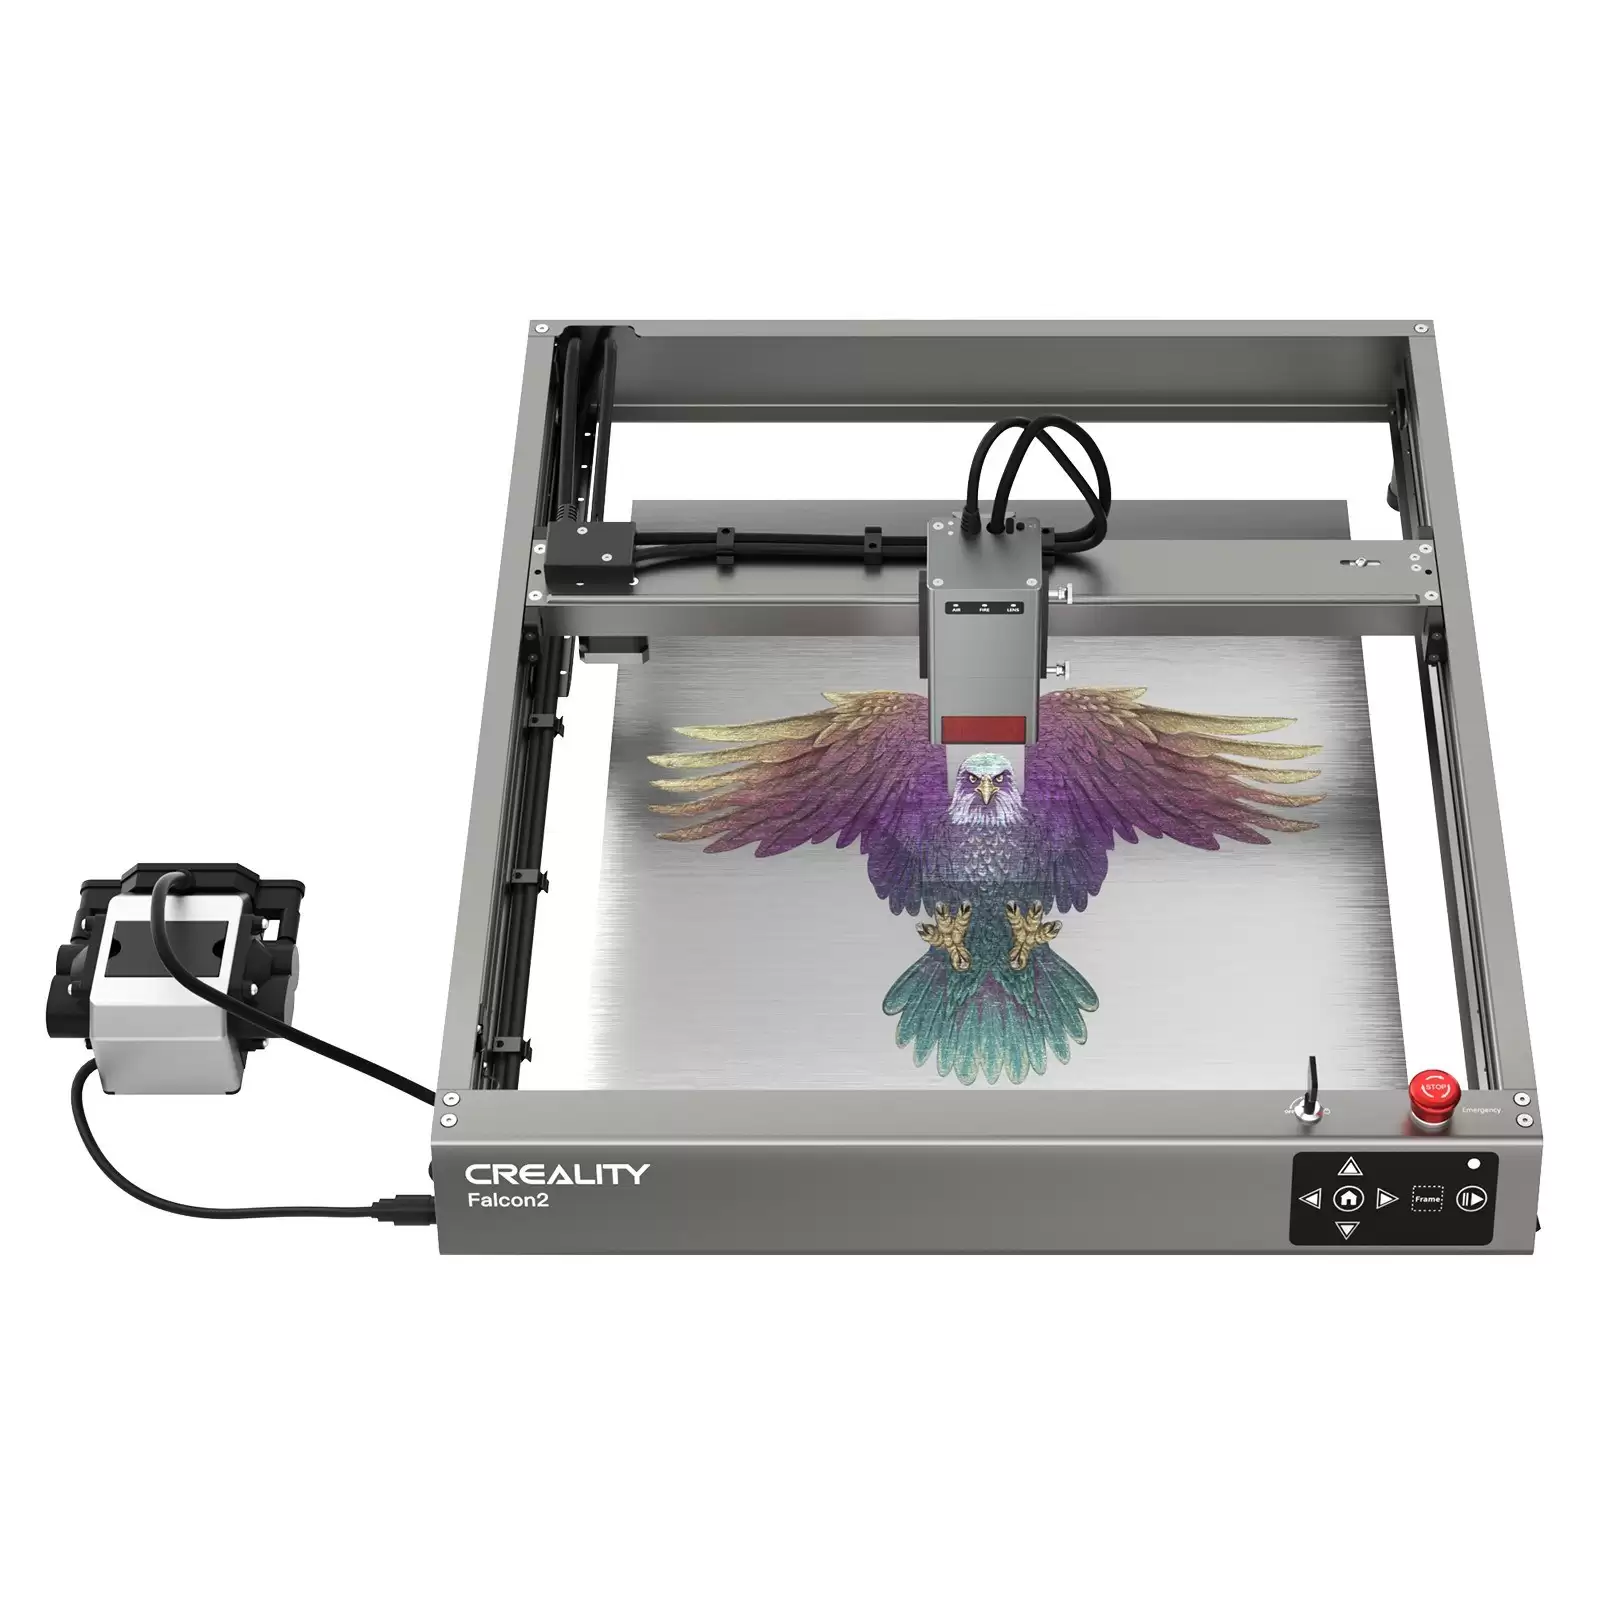 Order In Just $599 Creality 3d Falcon2 22w Laser Engraver With This Tomtop Discount Voucher